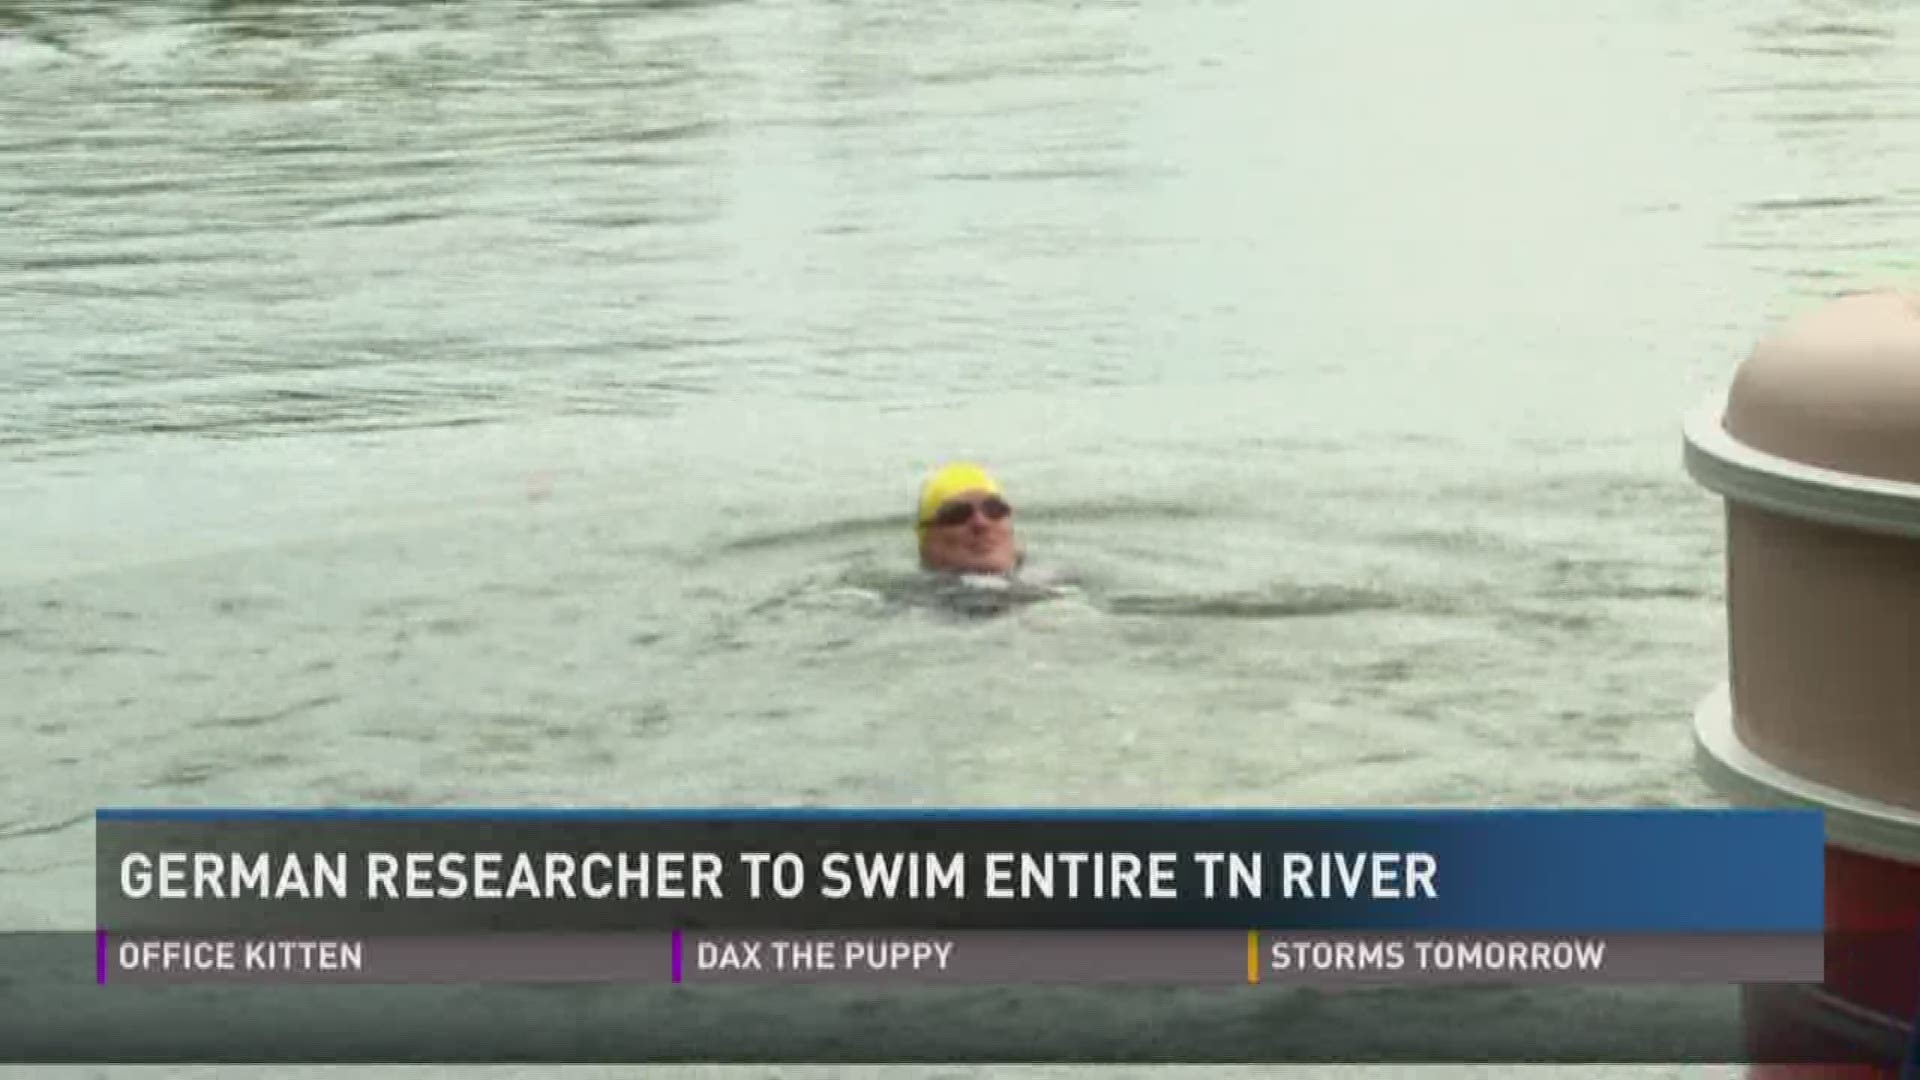 July 27, 2017: A German endurance swimmer and researcher kicked off his journey to swim the entire Tennessee River.